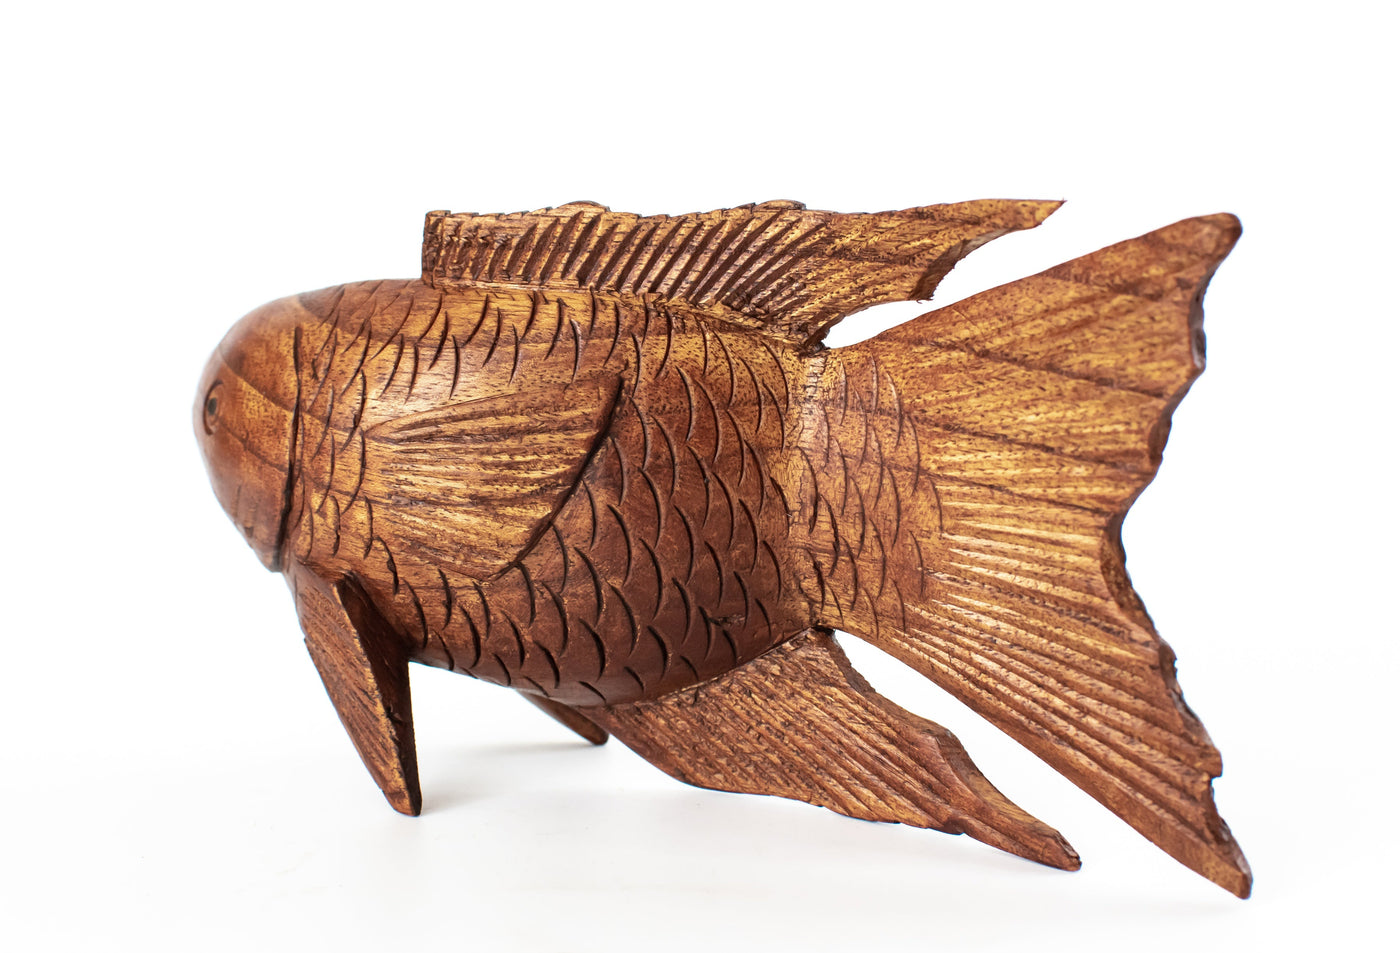 Wooden Hand Carved Koi Fish Statue Figurine Sculpture Art Home Decor Accent Handmade Handcrafted Seaside Tropical Nautical Ocean Coastal Decoration